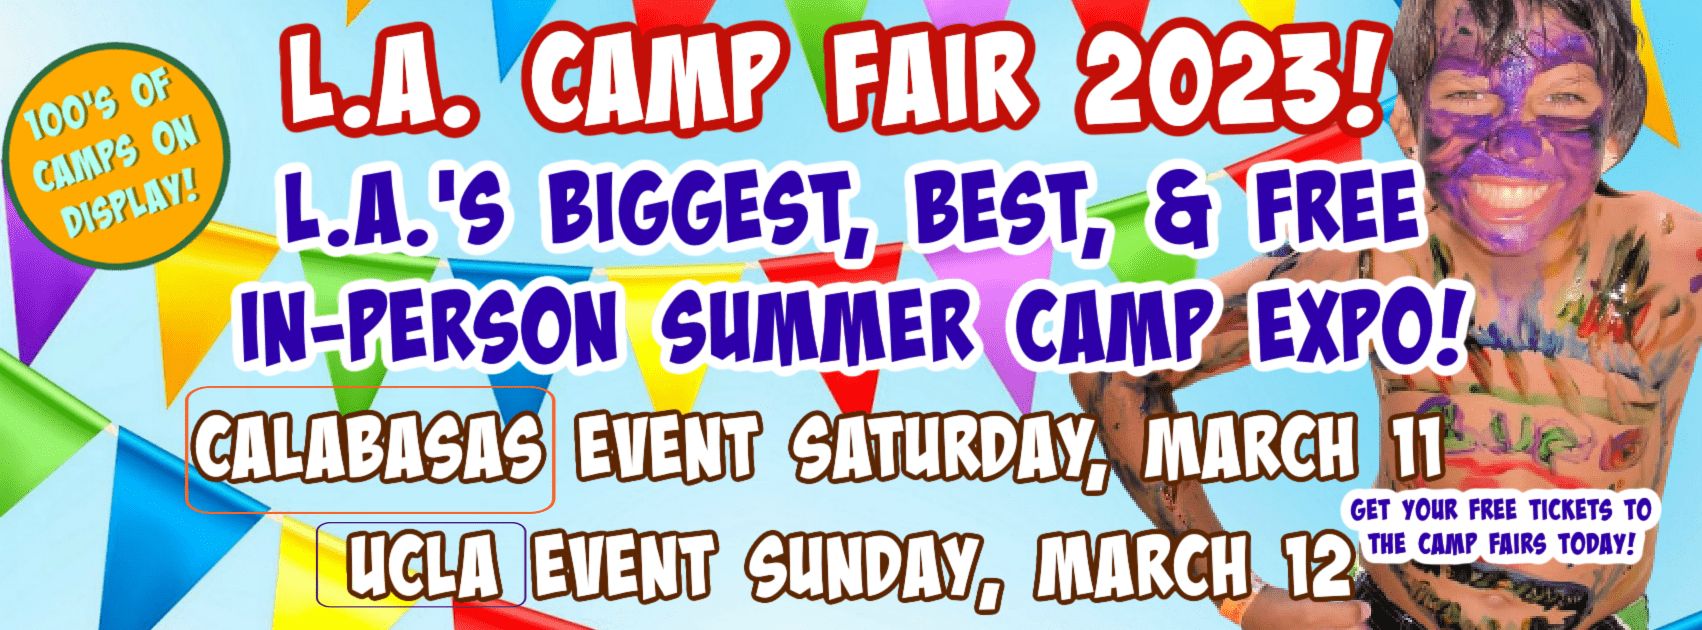 Find the Best Los Angeles Summer Camps at L.A. Camp Fair 2023 LOS